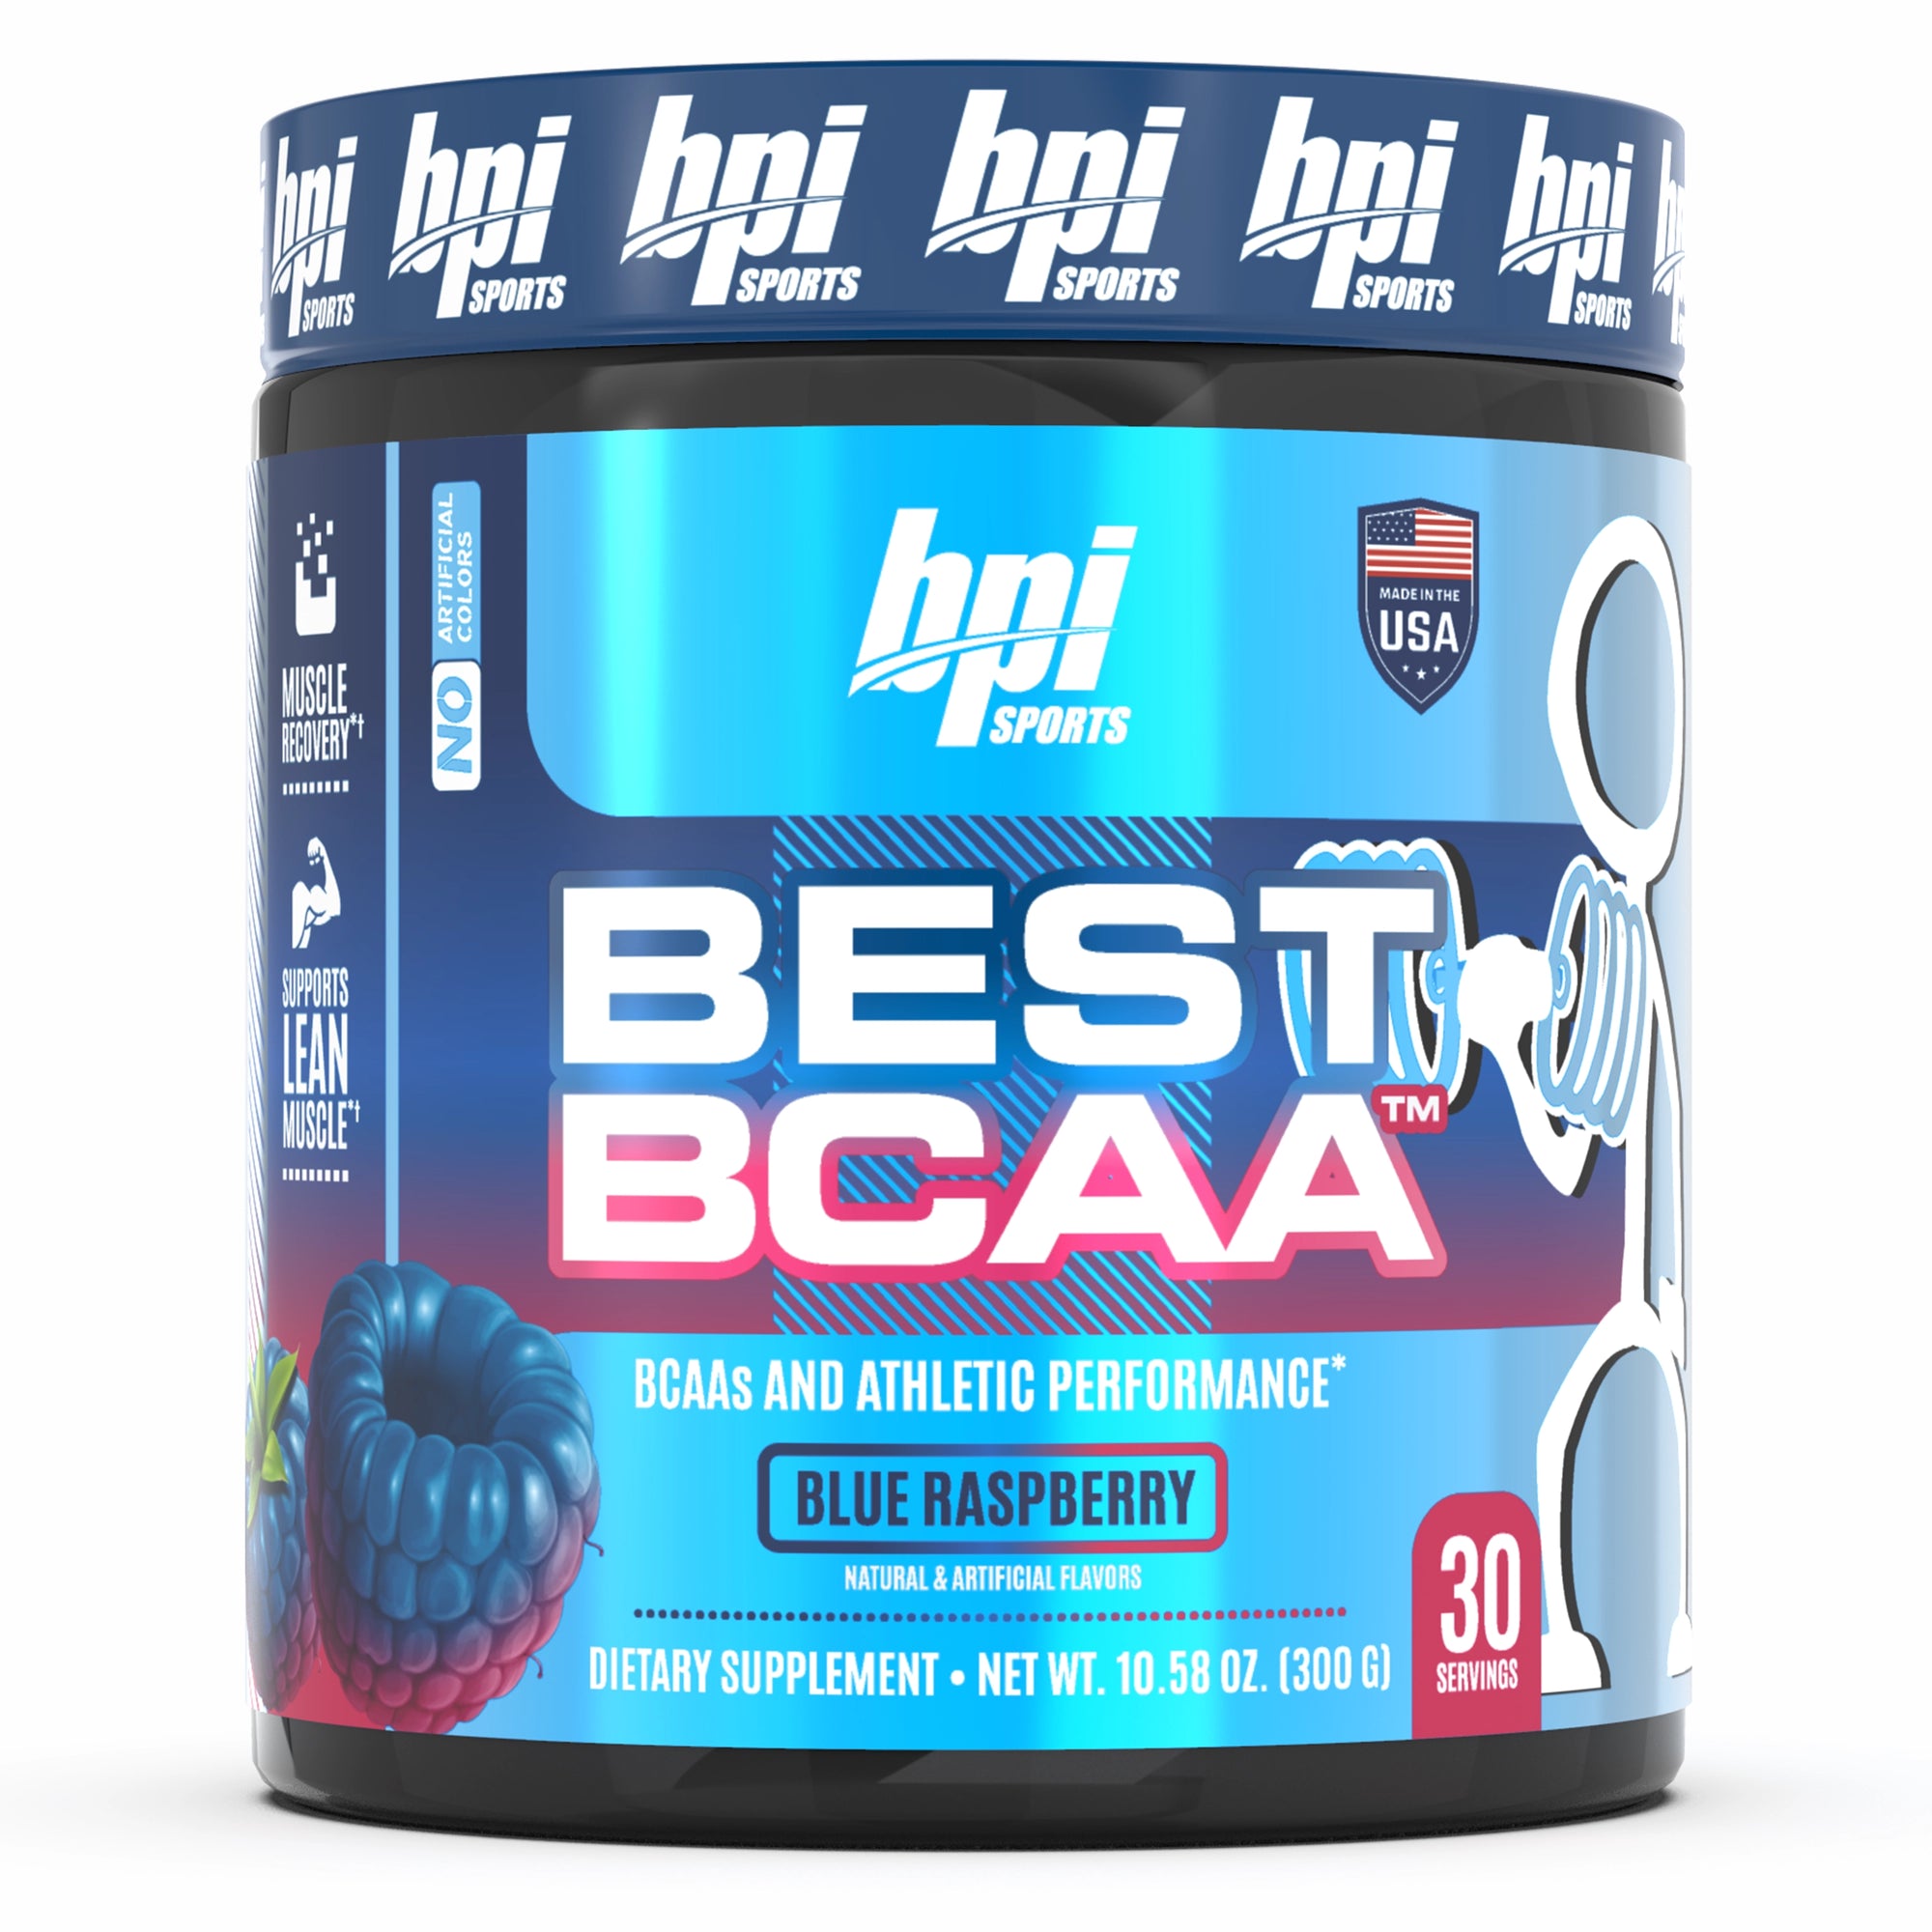 Best BCAA™ - Branched-Chain Amino Acids (30 Servings)